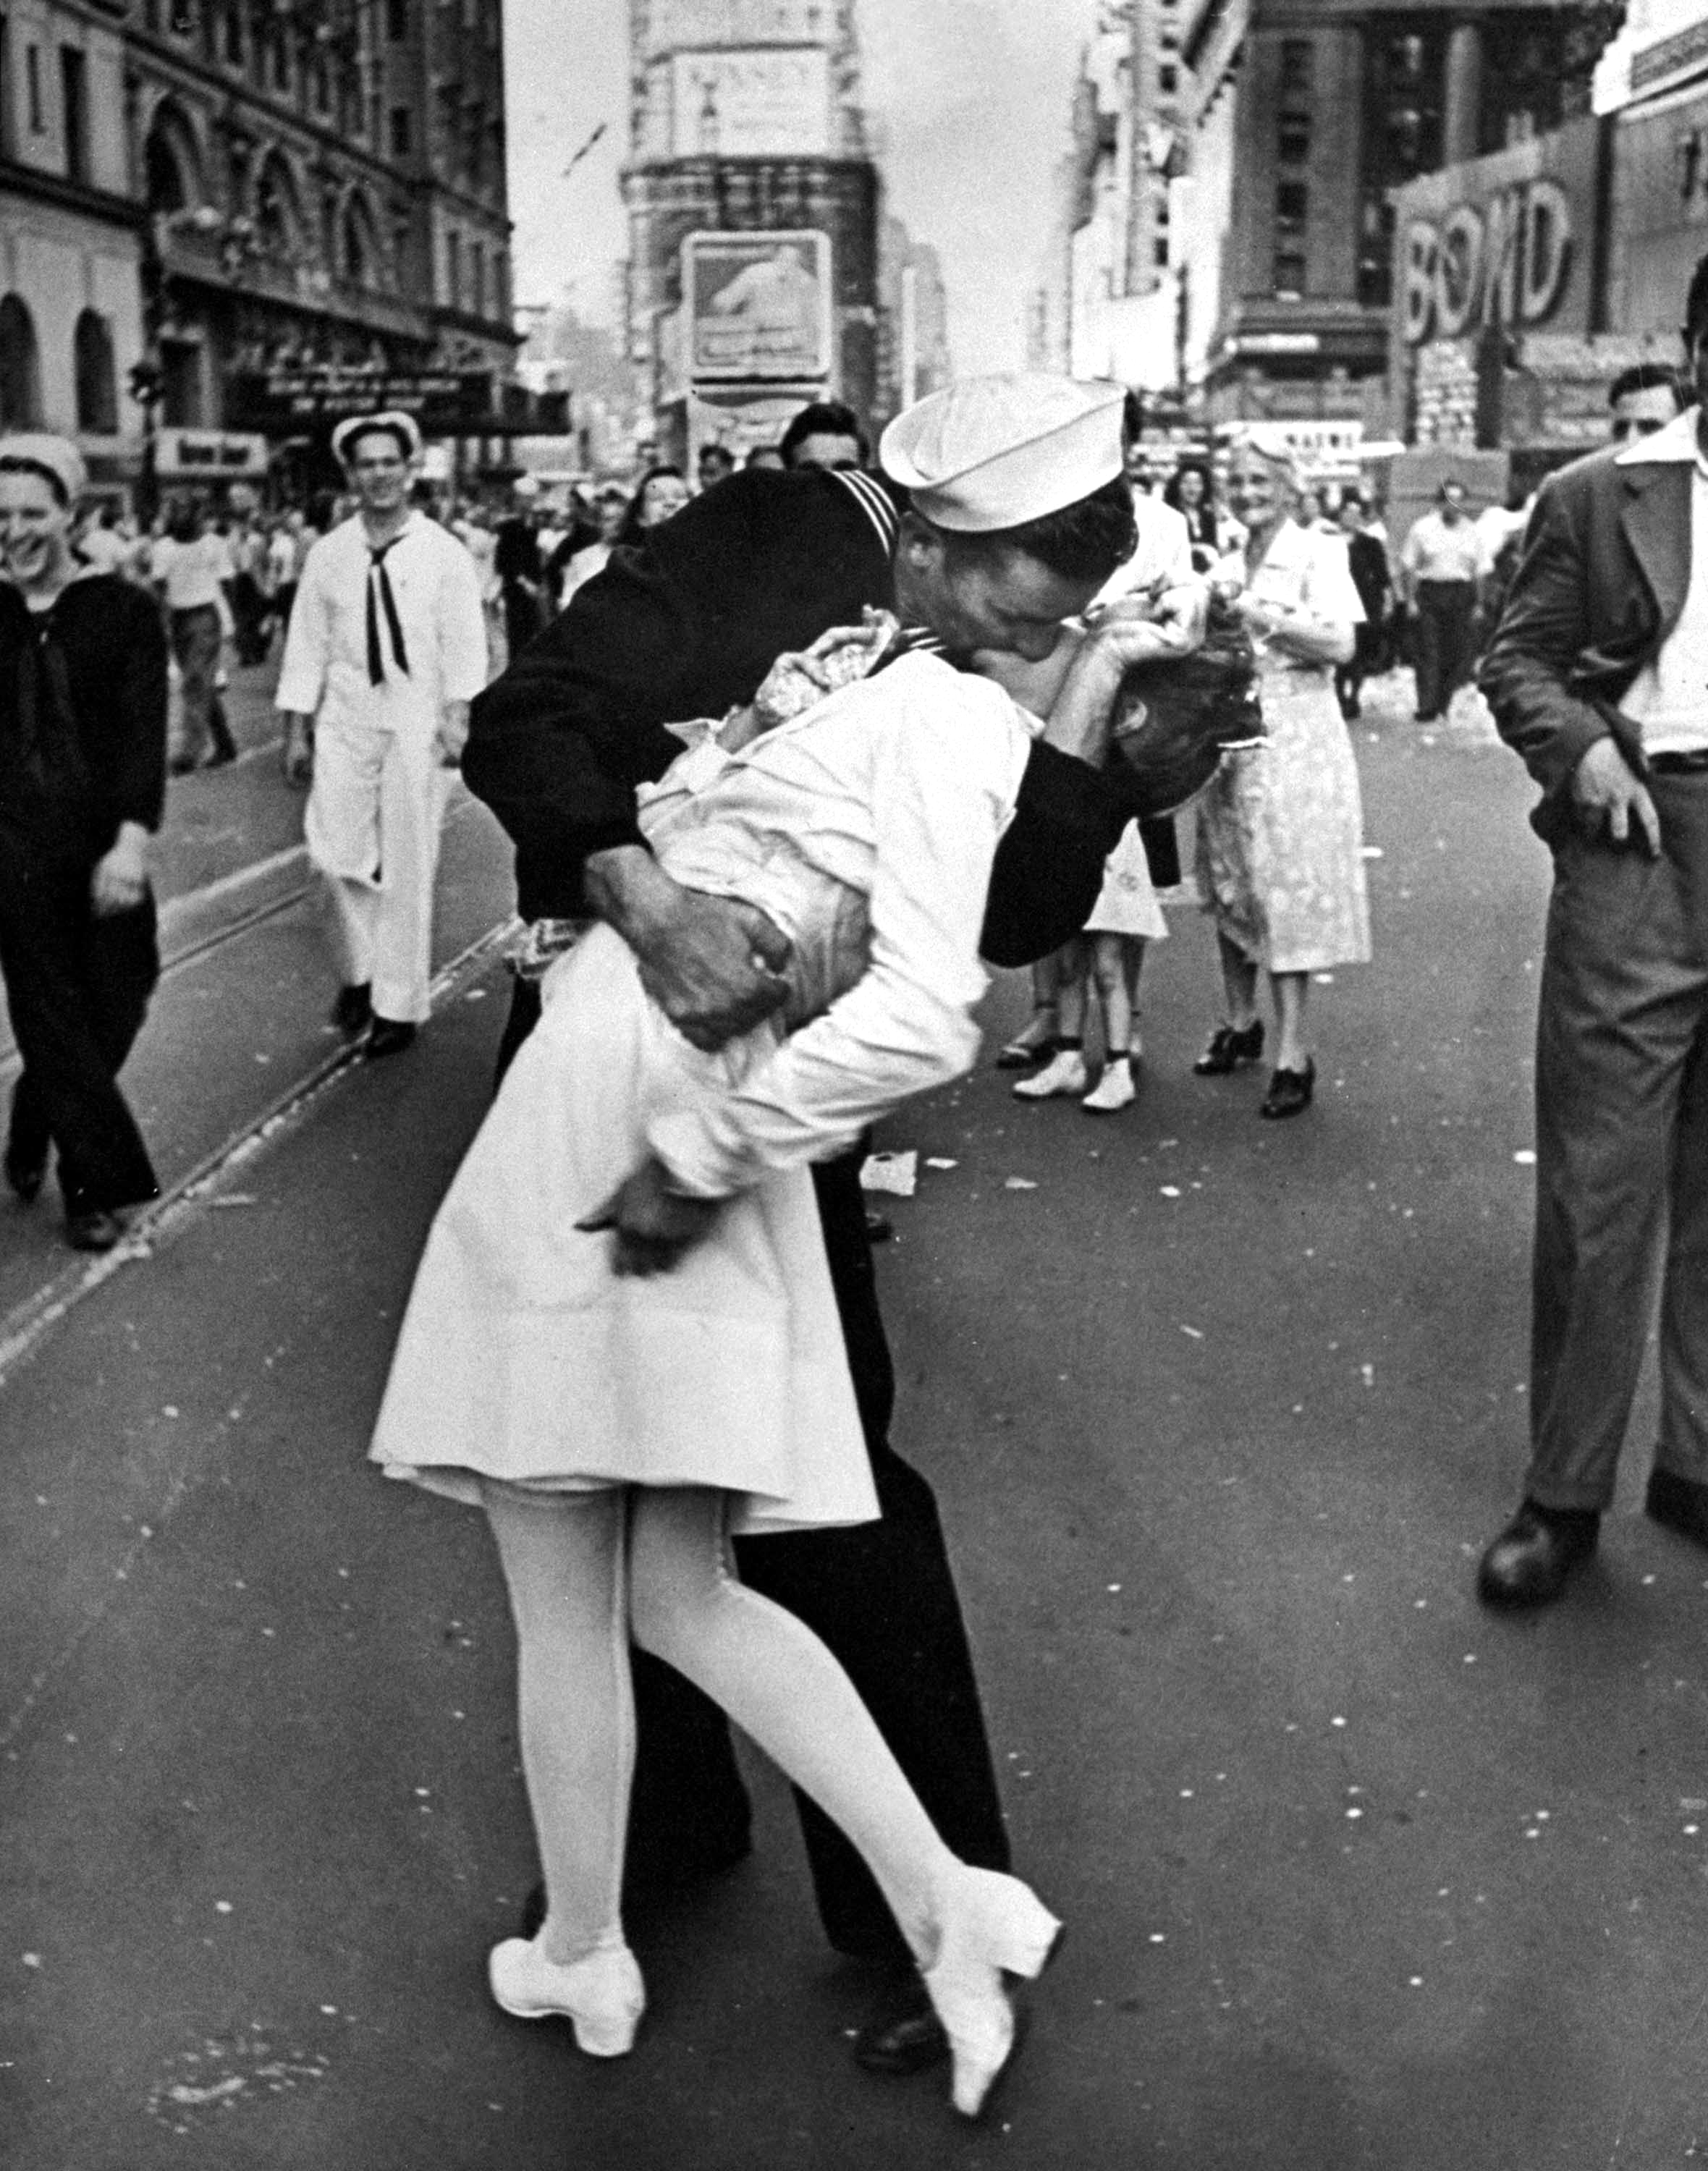 V-J Day, Aug. 14, 1945. Caption from the Aug. 27, 1945, issue of LIFE magazine: "In the middle of New York's Times Square a white-clad girl clutches her purse and skirt as an uninhibited sailor plants his lips squarely on hers."